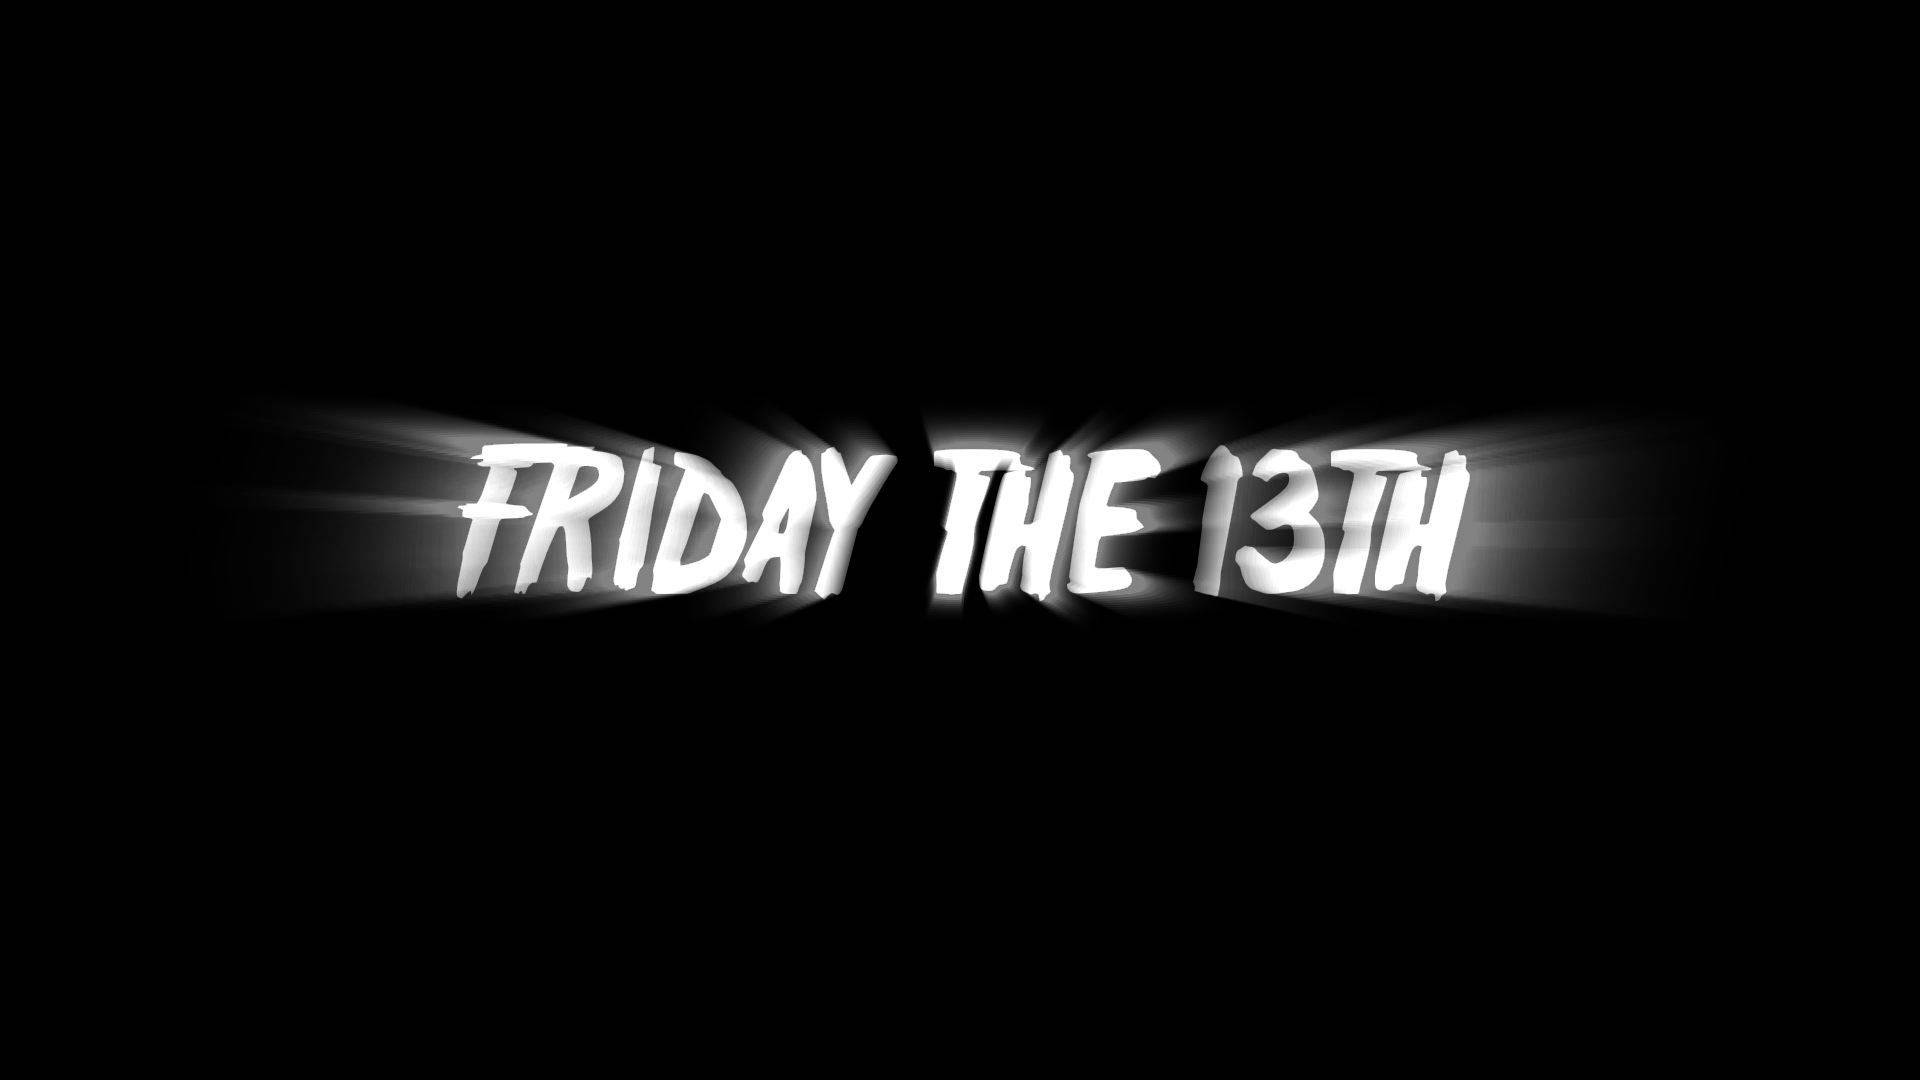 Friday The 13th Glowing Text